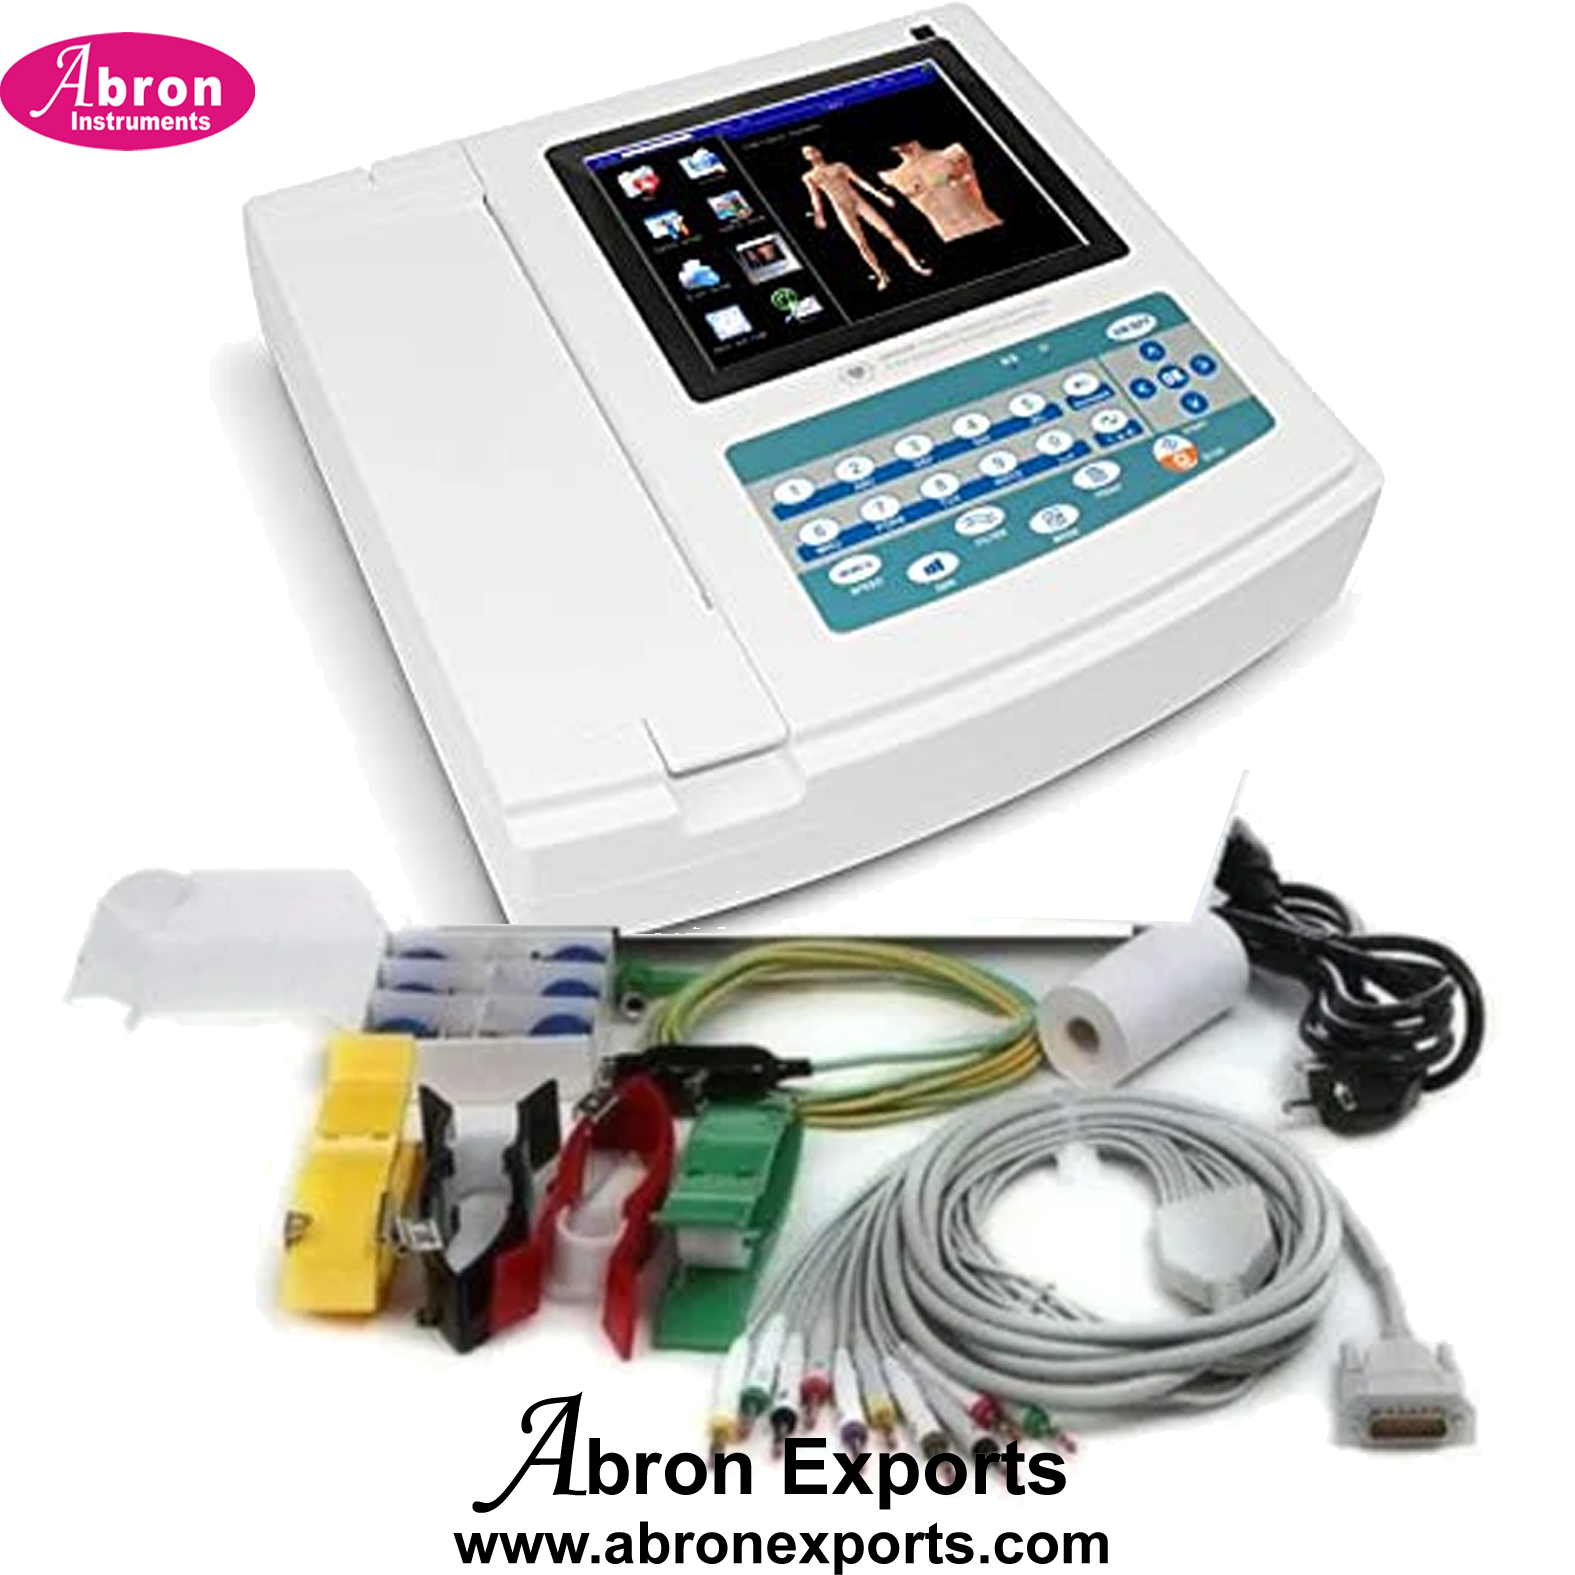 ECG Machine 12 channel Electrocardio graph with electrodes wire set Hospital Medical Clinic Nursing Home Abron ABM-2101A12 